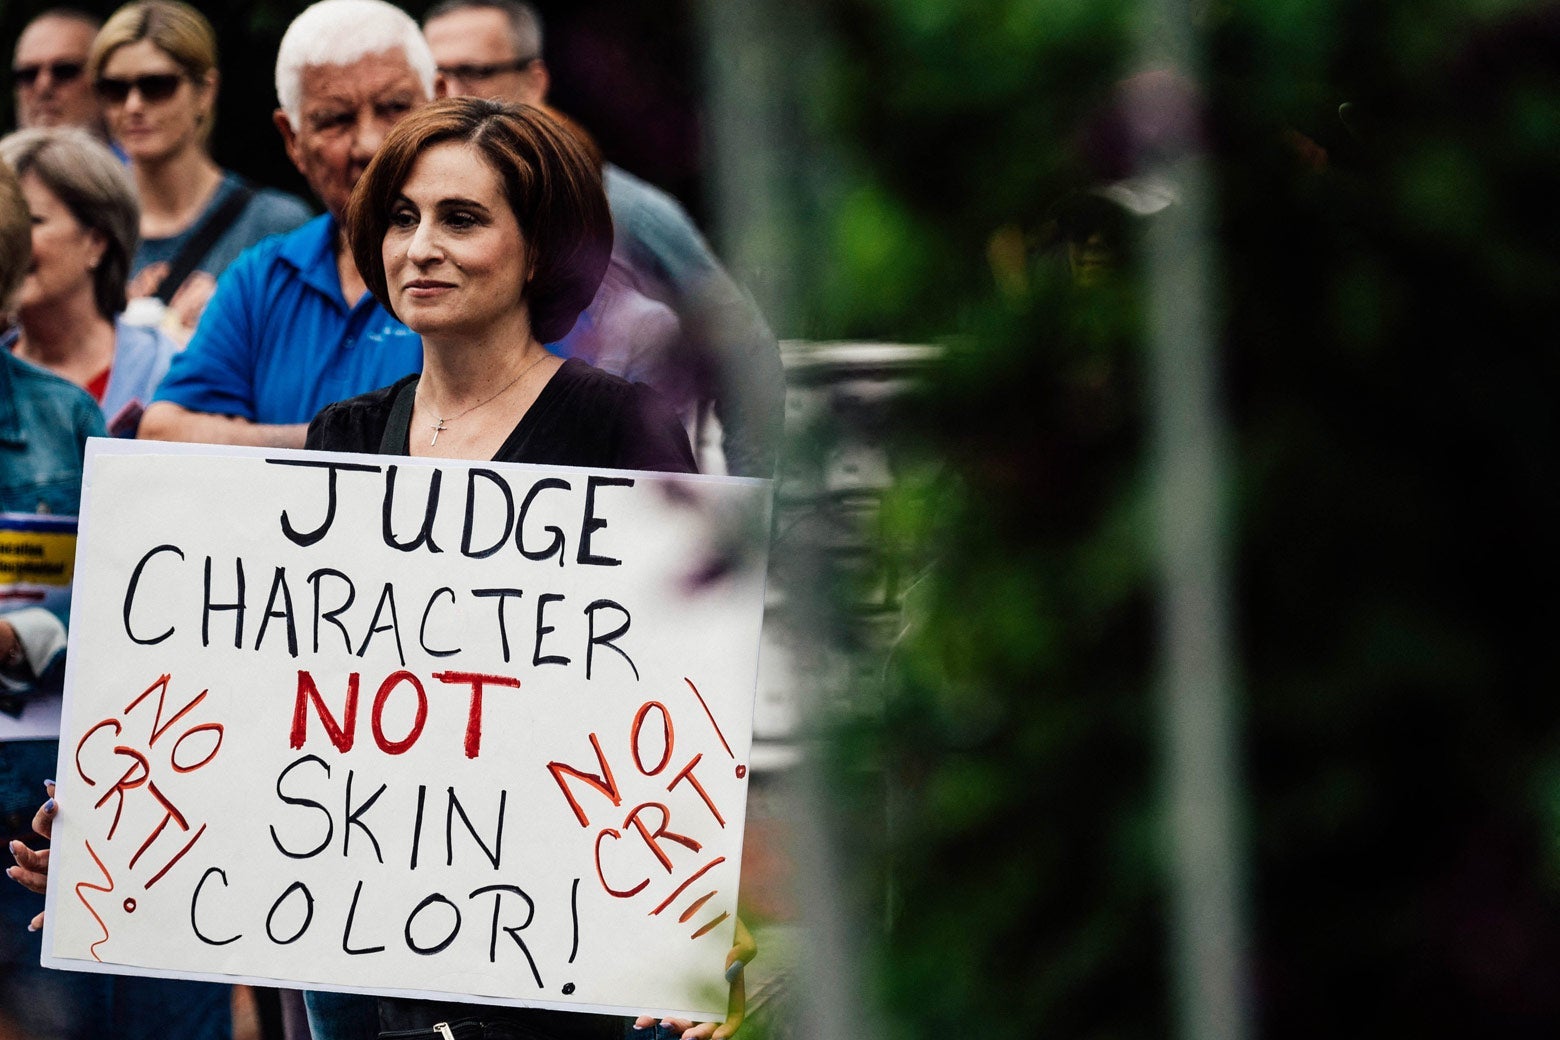 A woman holds a sign that says "Judge Character Not Skin Color! No CRT!" as she stands among other protesters